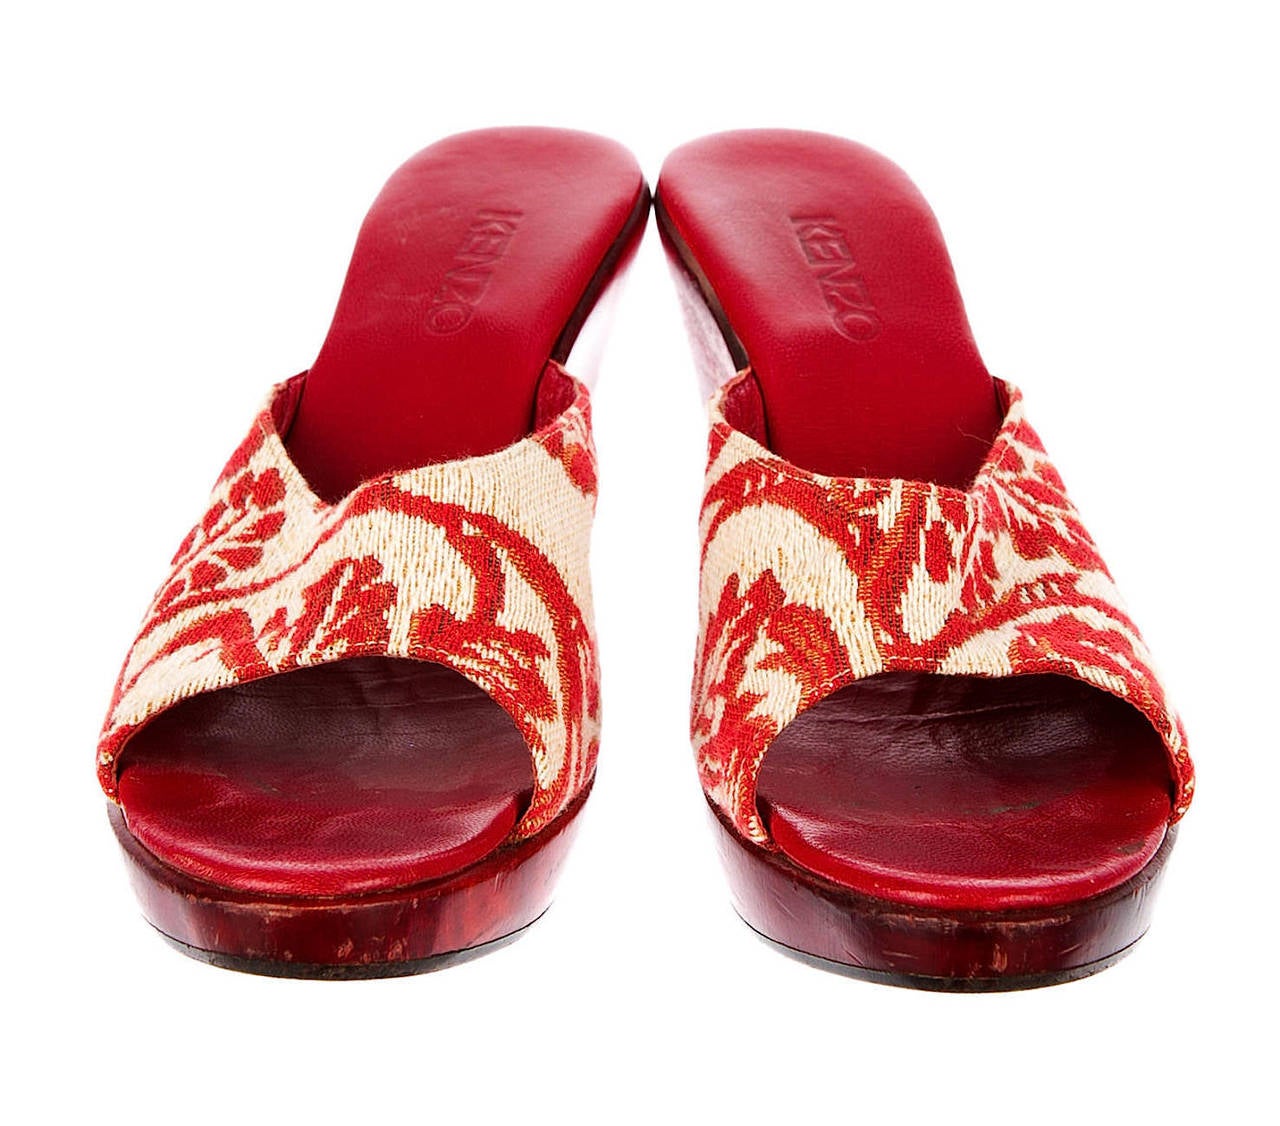 Kenzo Platform Clogs with Jacquard Uppers, IT 39 In Good Condition For Sale In Bethesda, MD